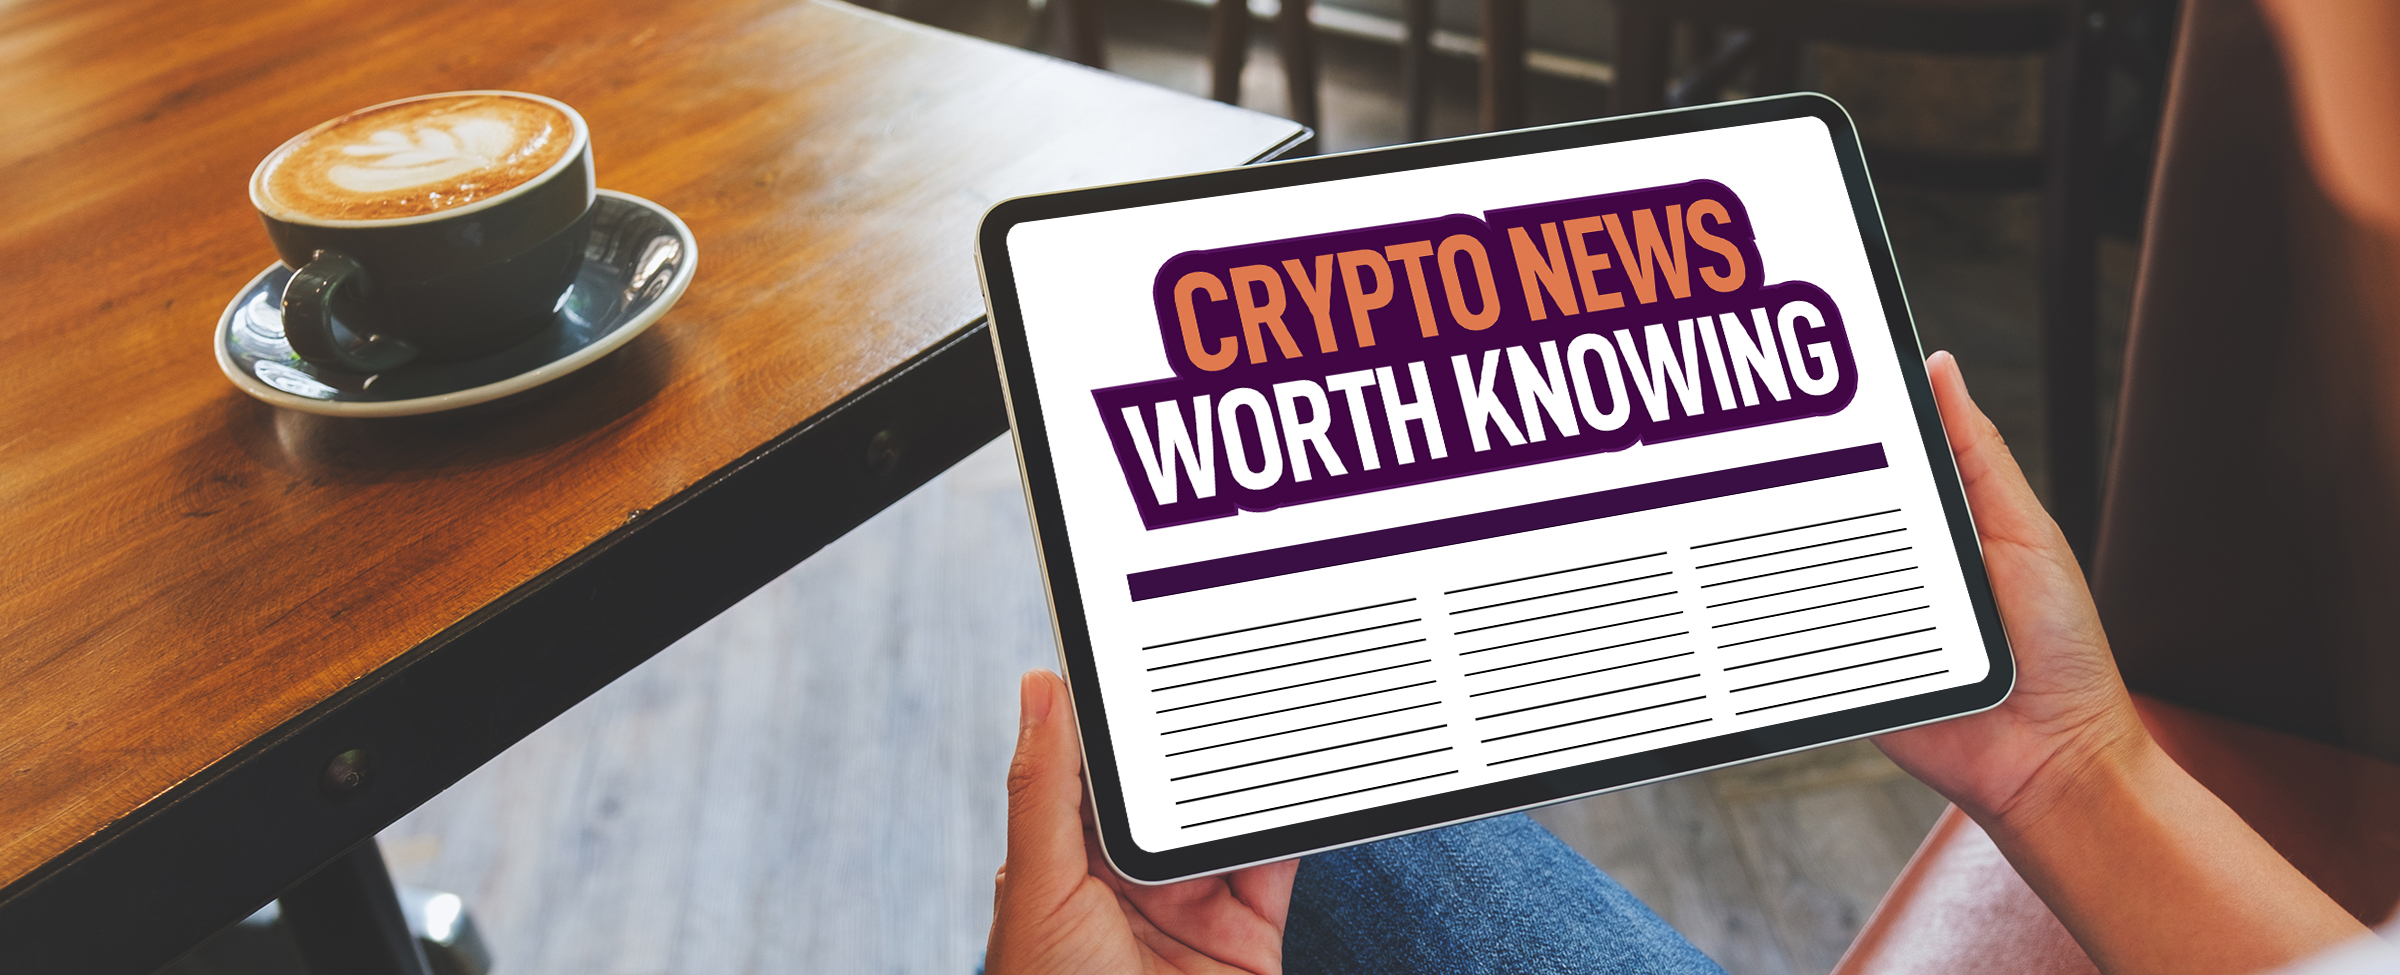 A person sits on a bench seat inside a diner, holding up an iPad that shows a news site with a heading that reads “Crypto News Worth Knowing”. Next the bench seat is a wooden table, with a black coffee mug with a cafè latte, on a black saucer.